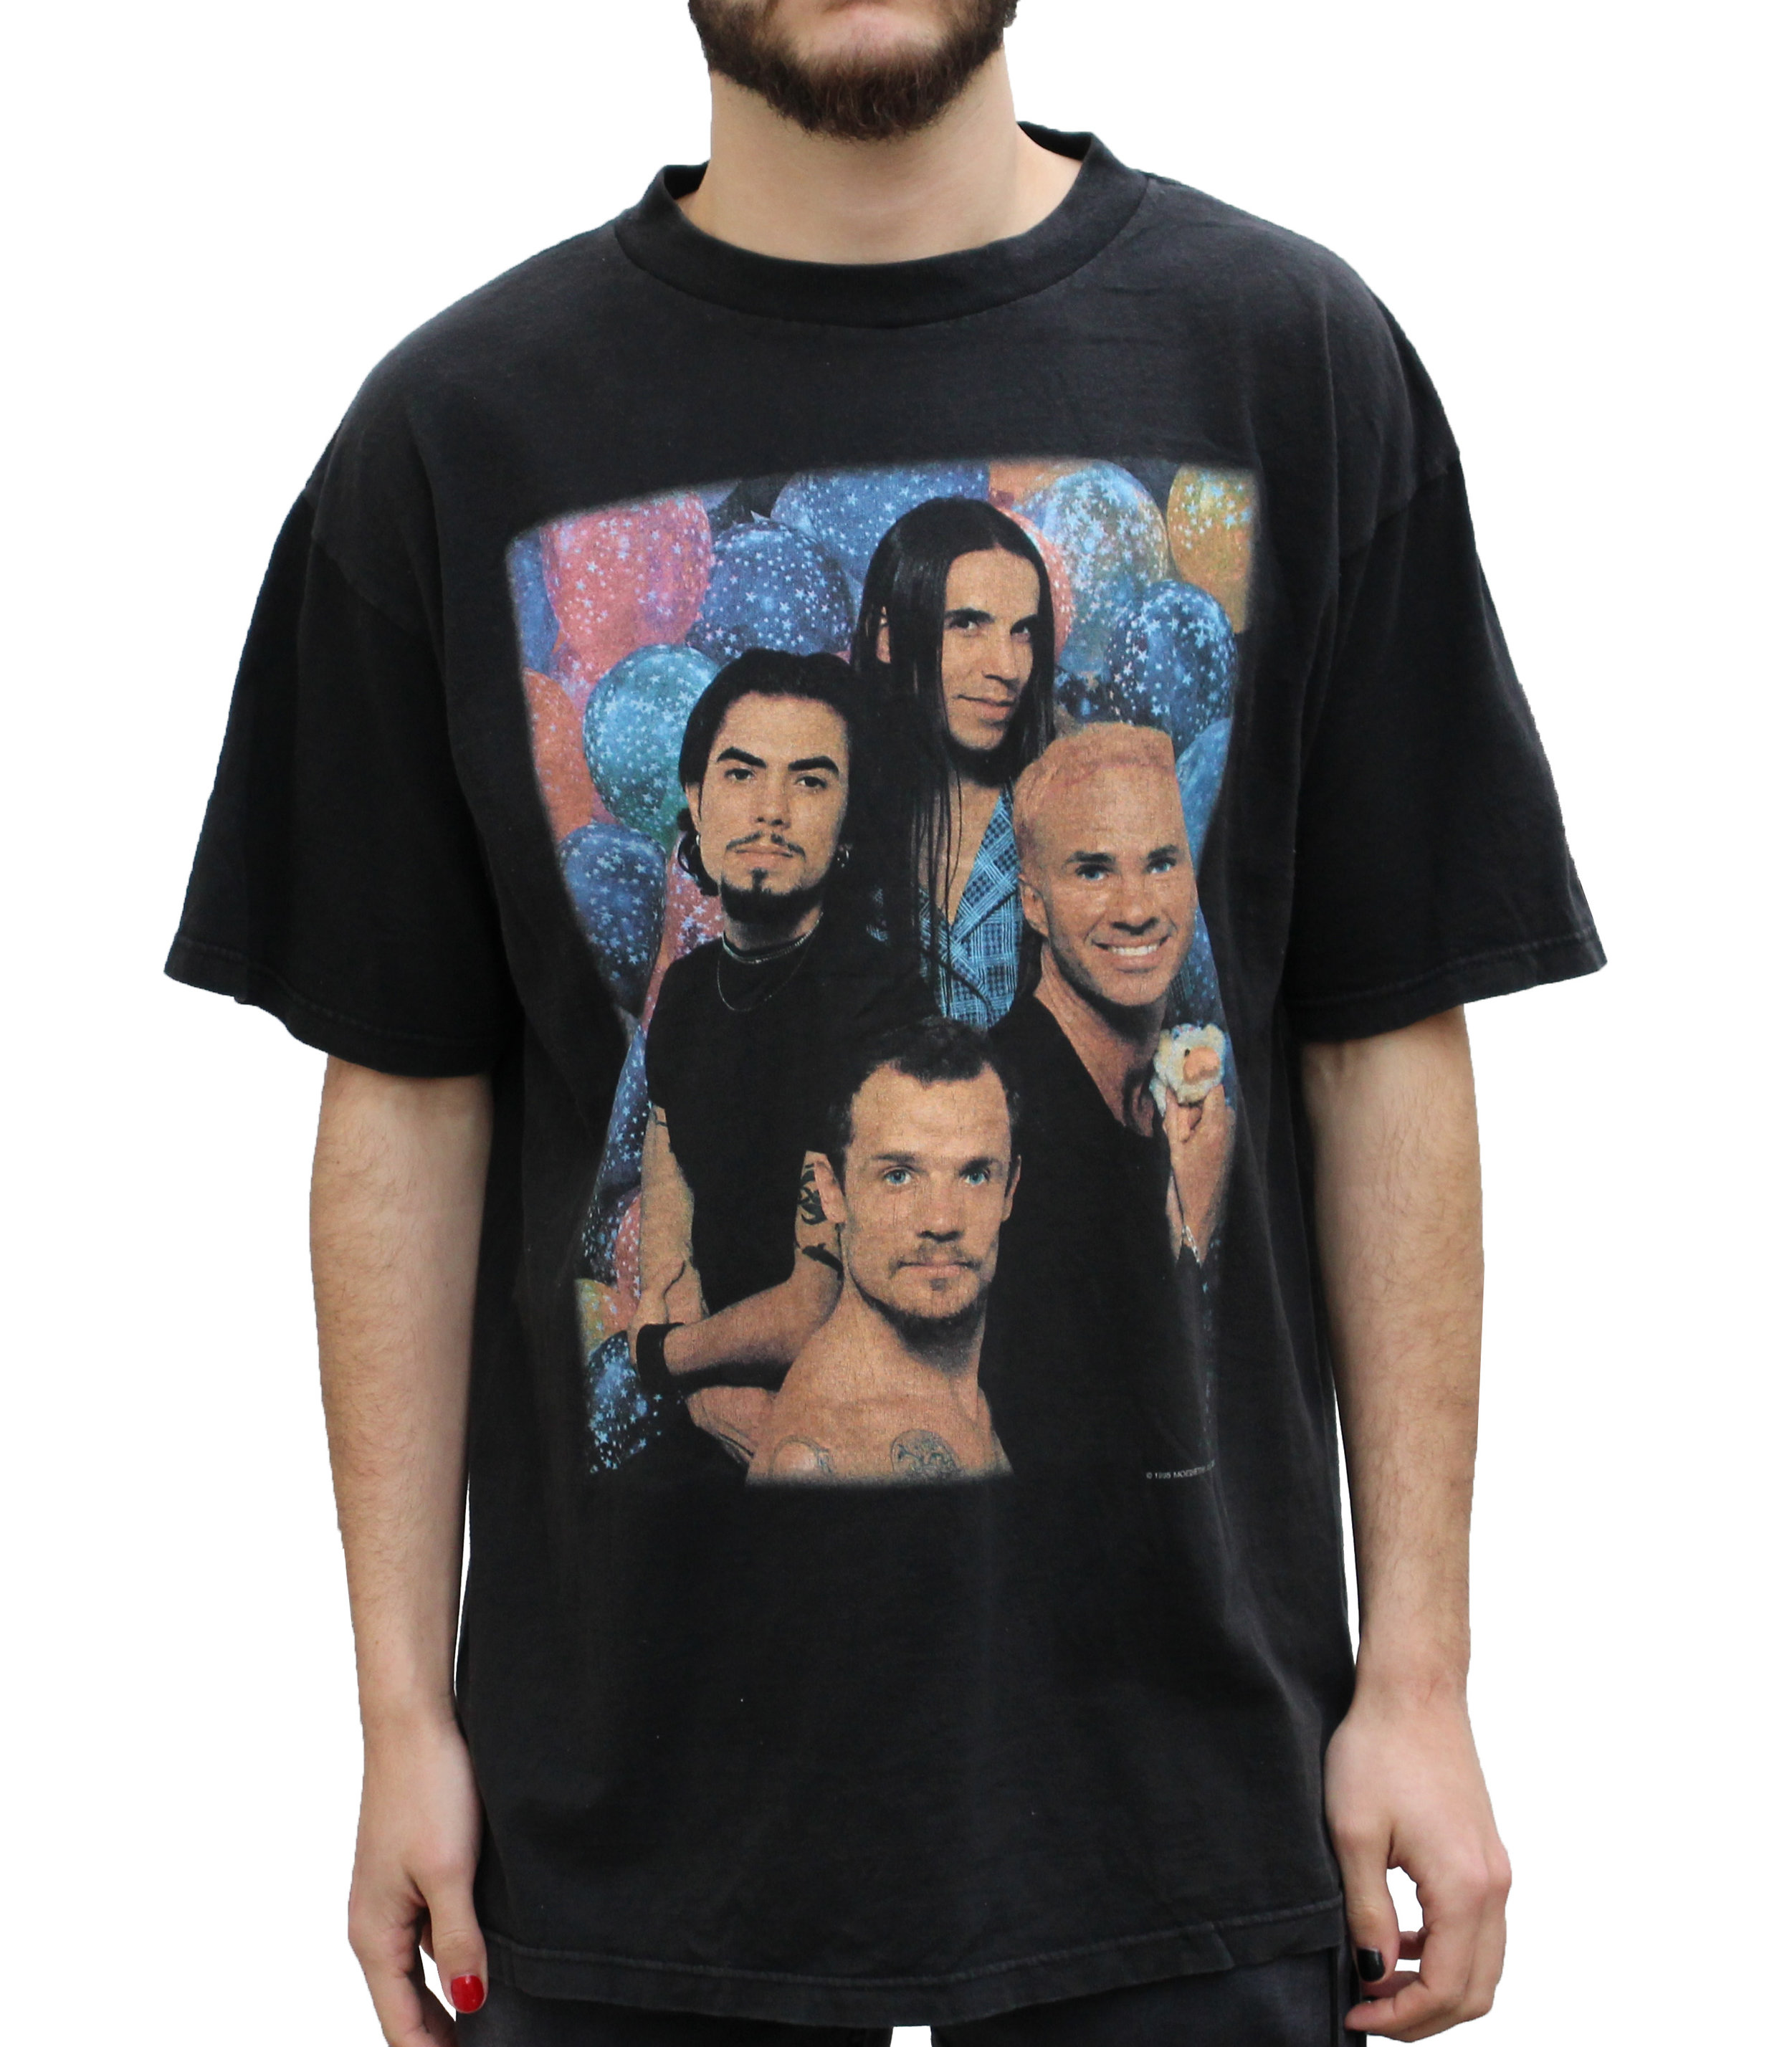 red hot chili peppers band shirt